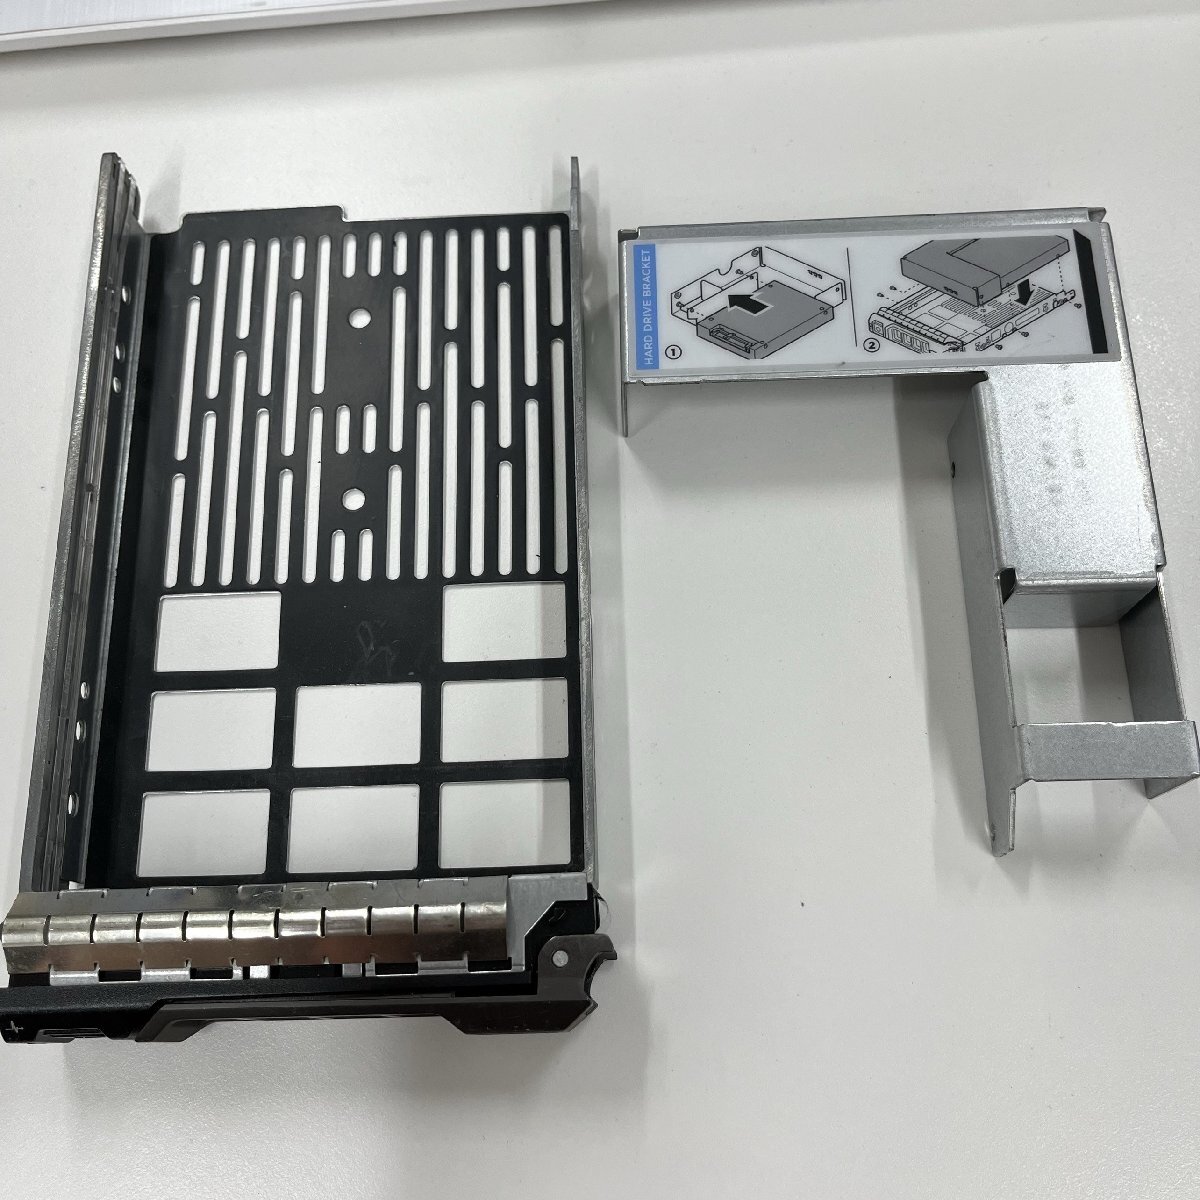 Dell PowerEdge server for 3.5 -inch HDD Cade . tray (0F238F)2.5 -inch HDD adaptor attaching * secondhand goods *Q00052